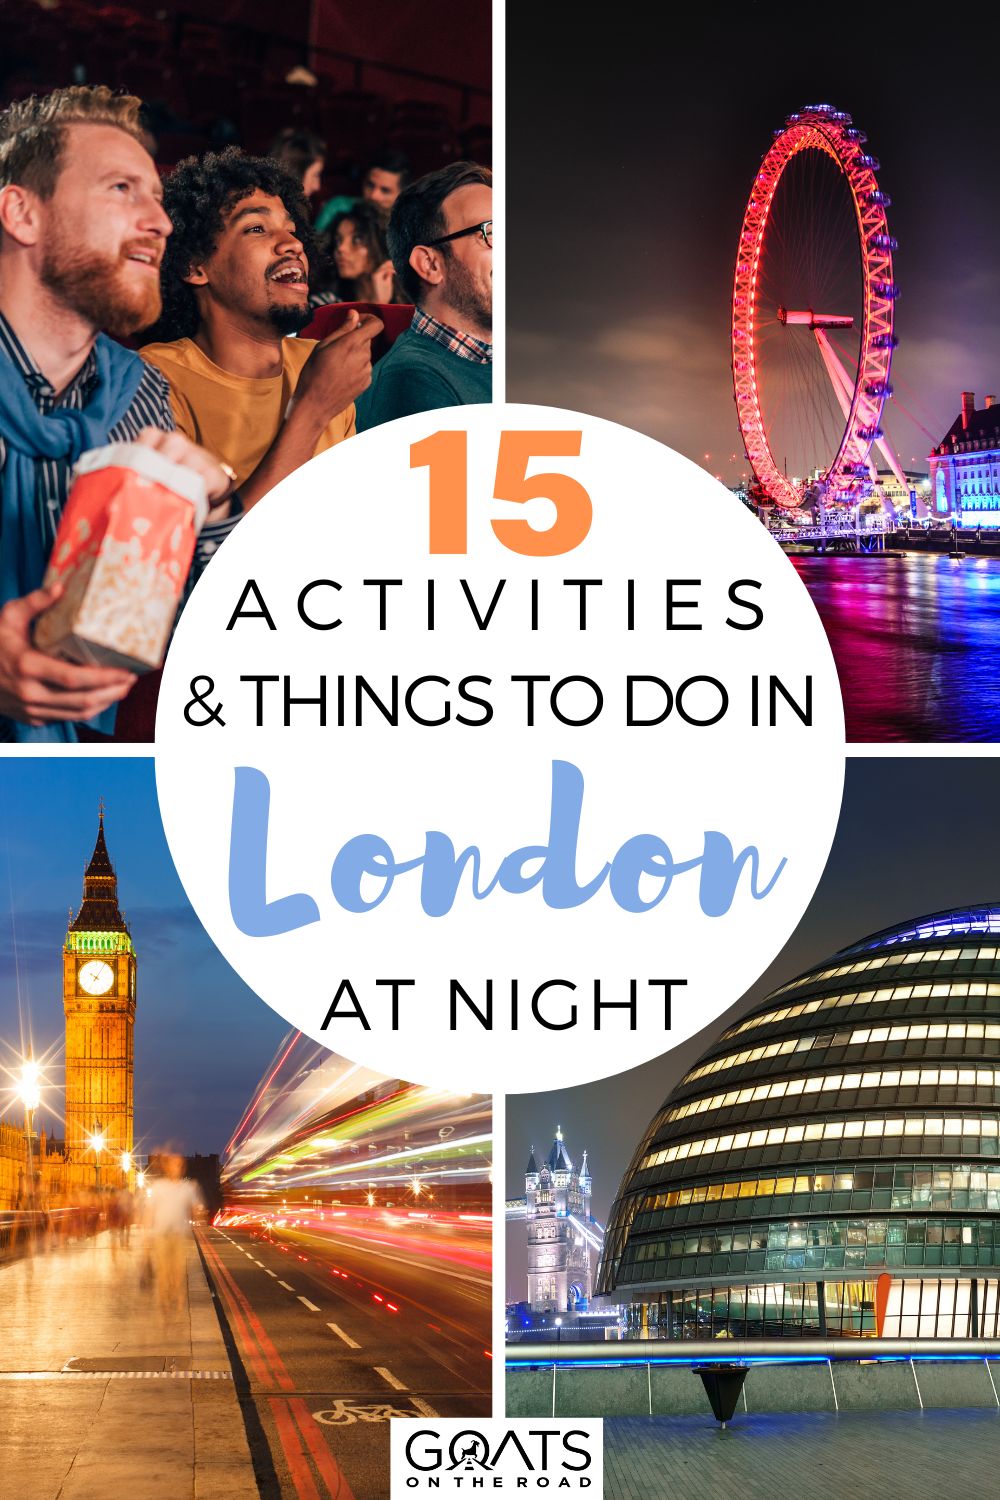 15 Activities & Things To Do In London At Night